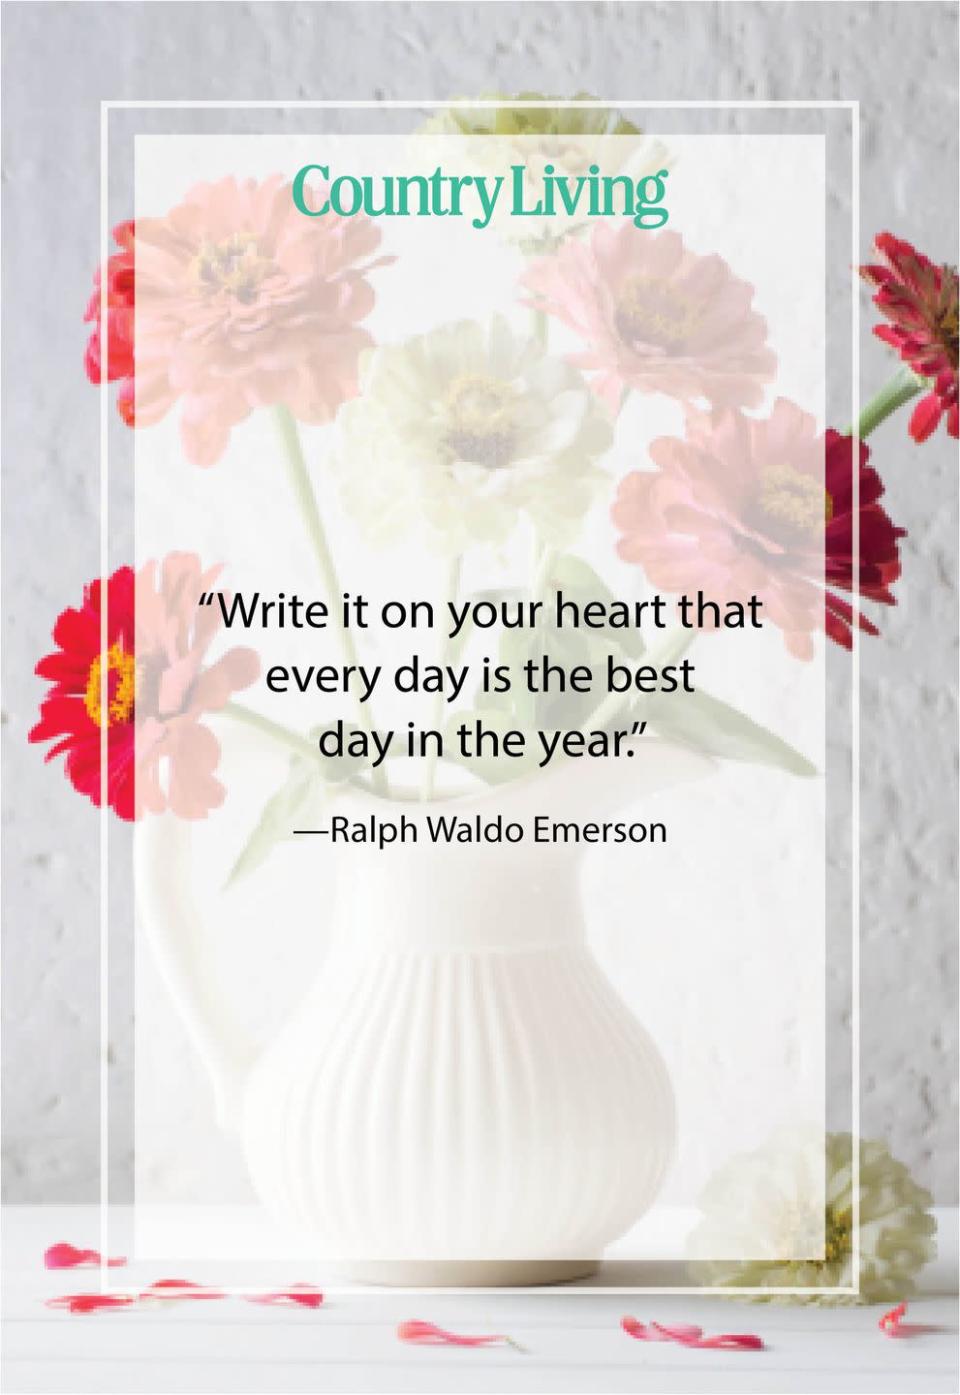 <p>“Write it on your heart that every day is the best day in the year.”</p>